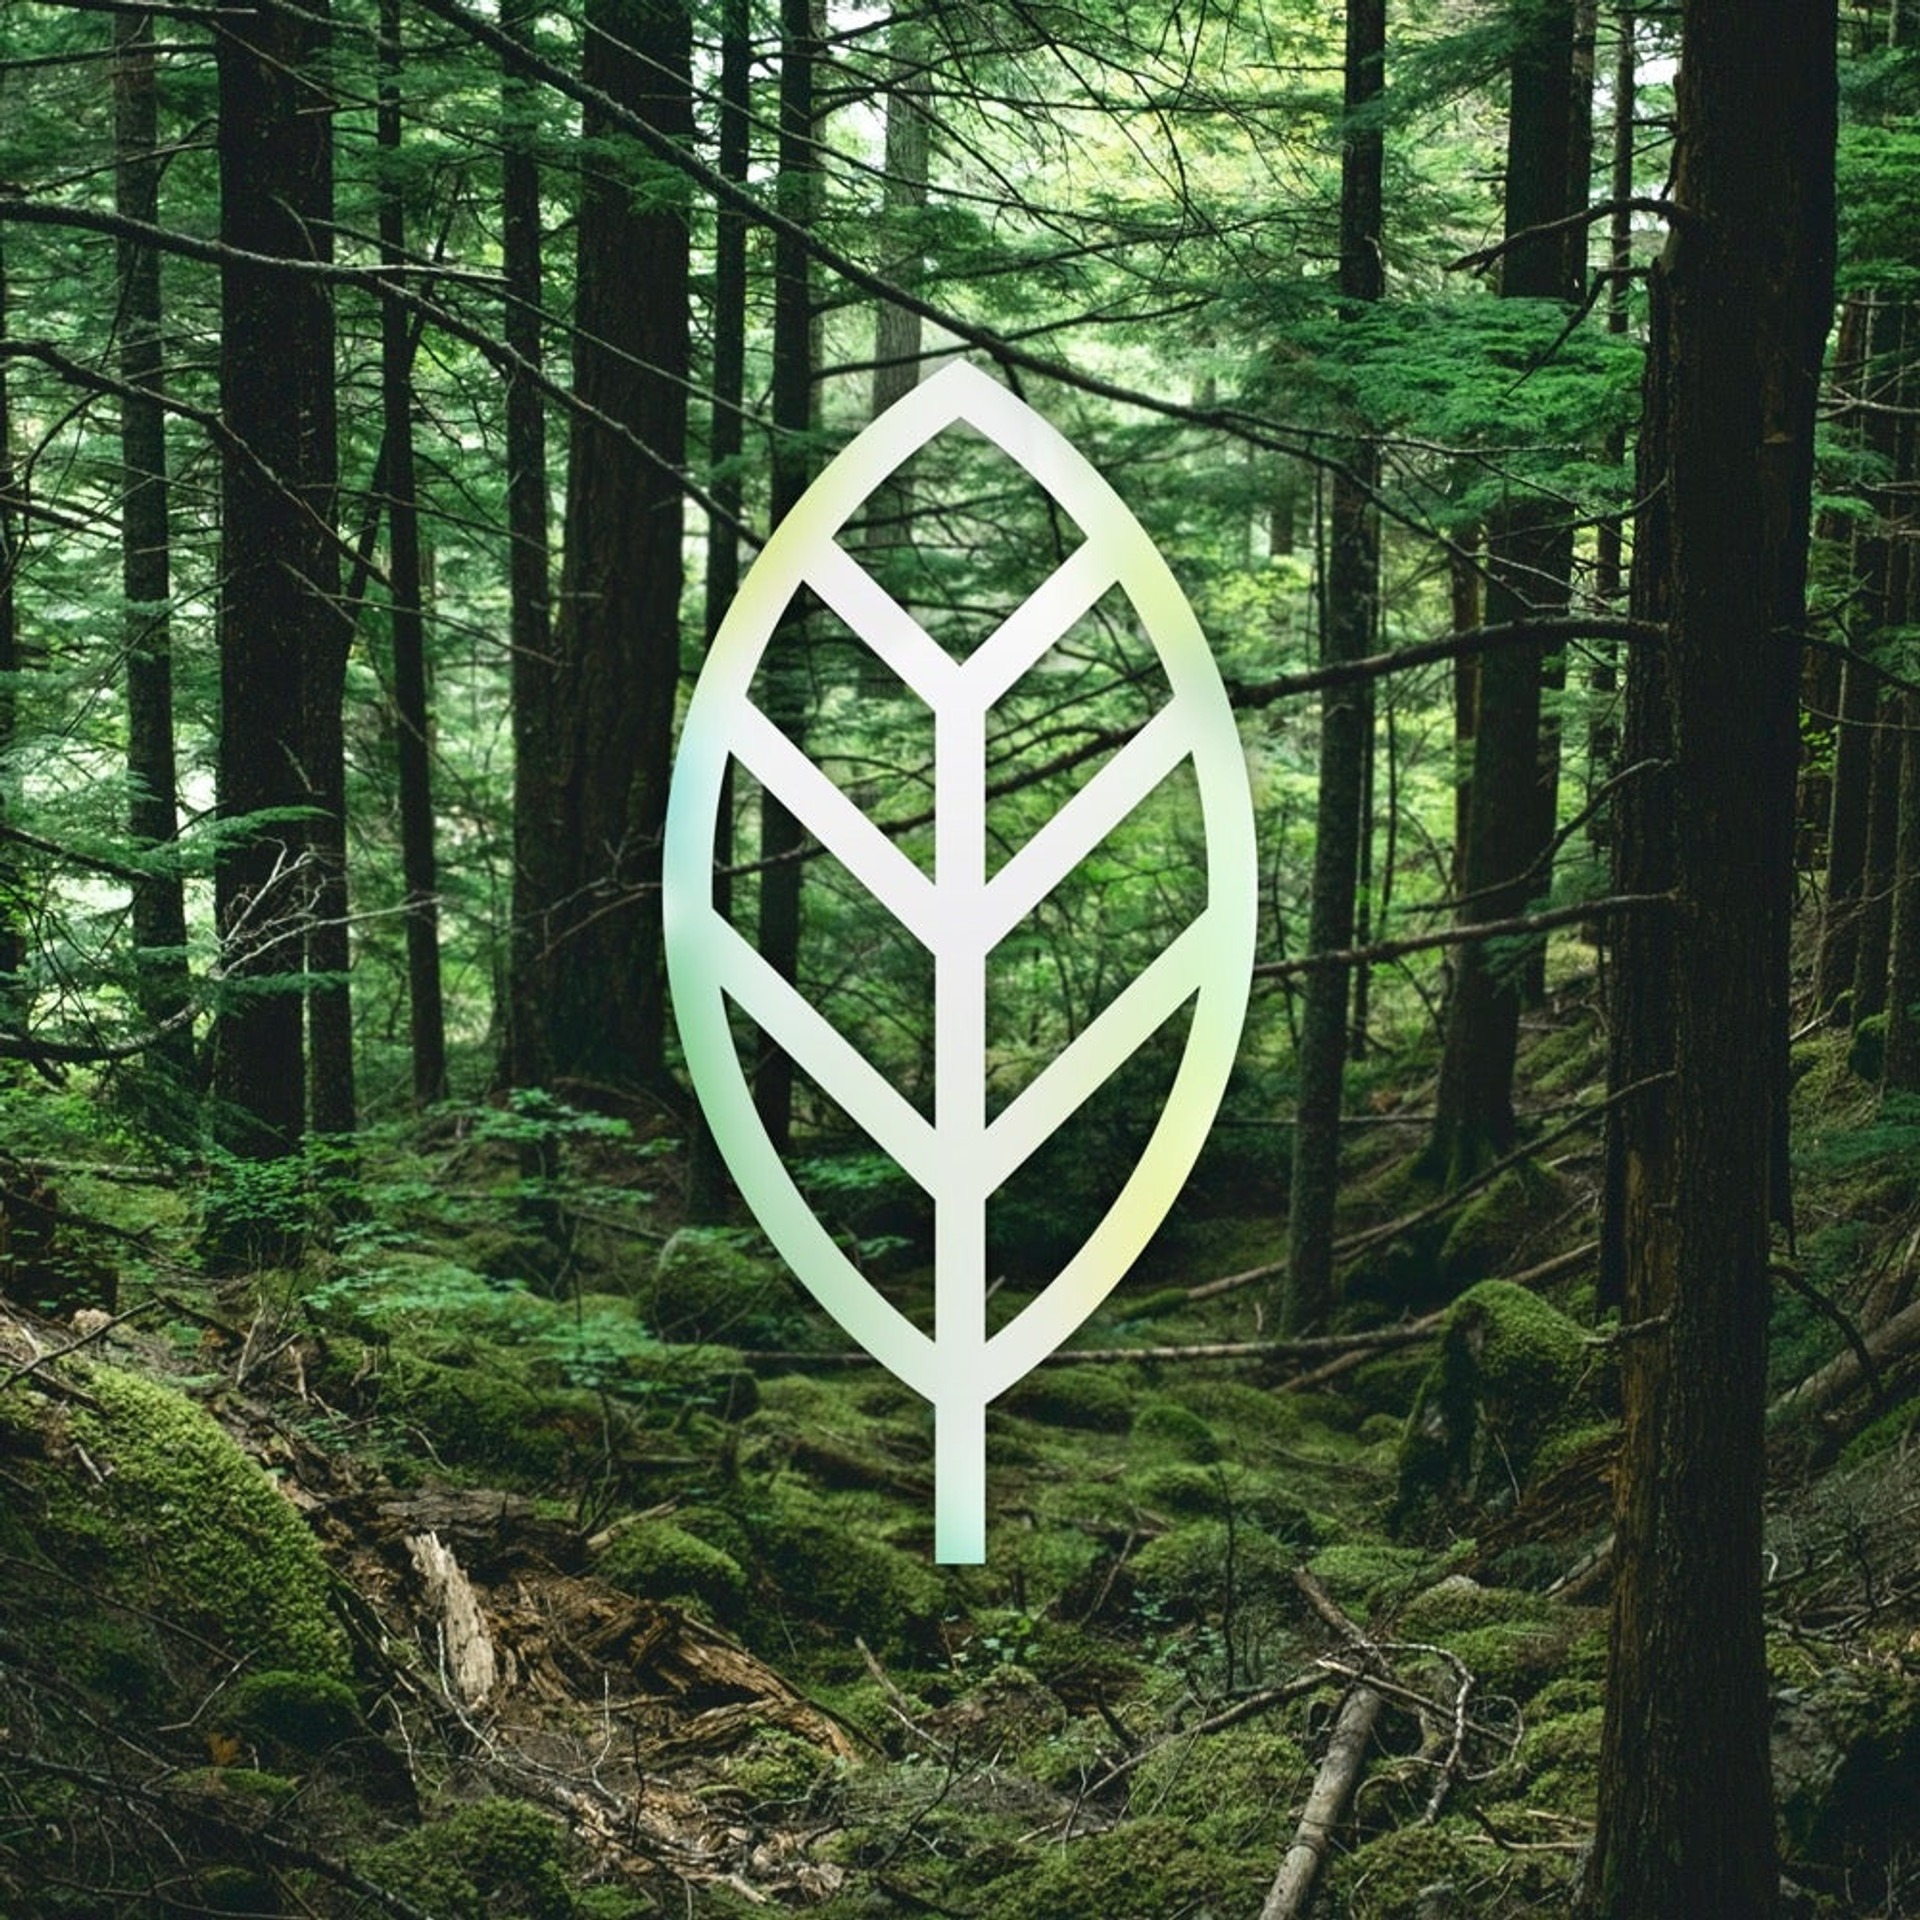 FSC Certification|| FSC, an organization working to protect healthy forests, certified Glass Elite Privacy with its recyclable packaging made from recycled materials.